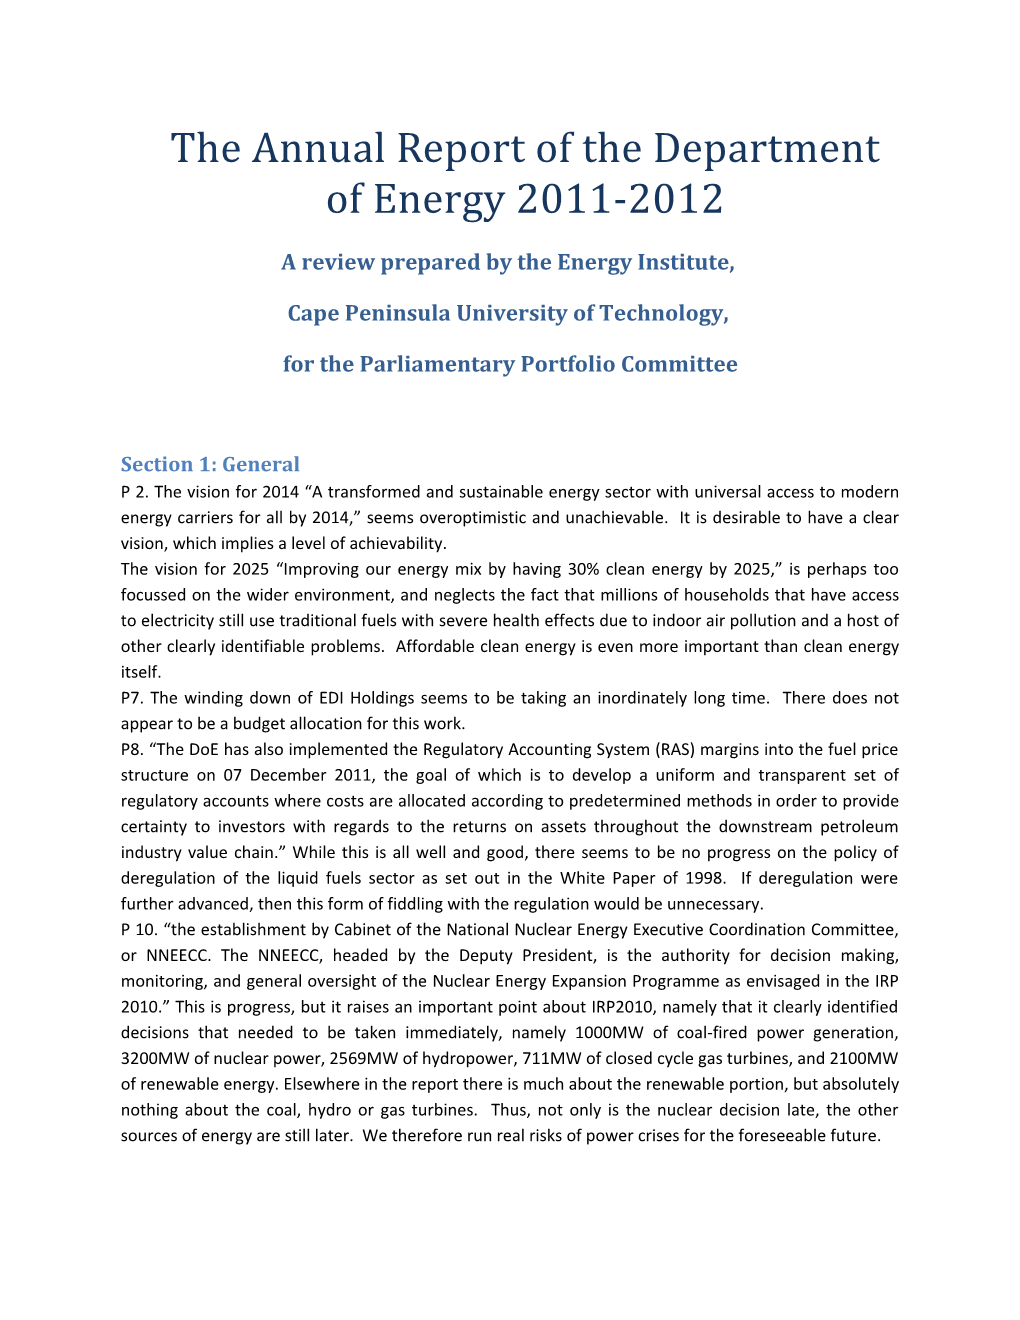 The Annual Report of the Department of Energy 2011-2012